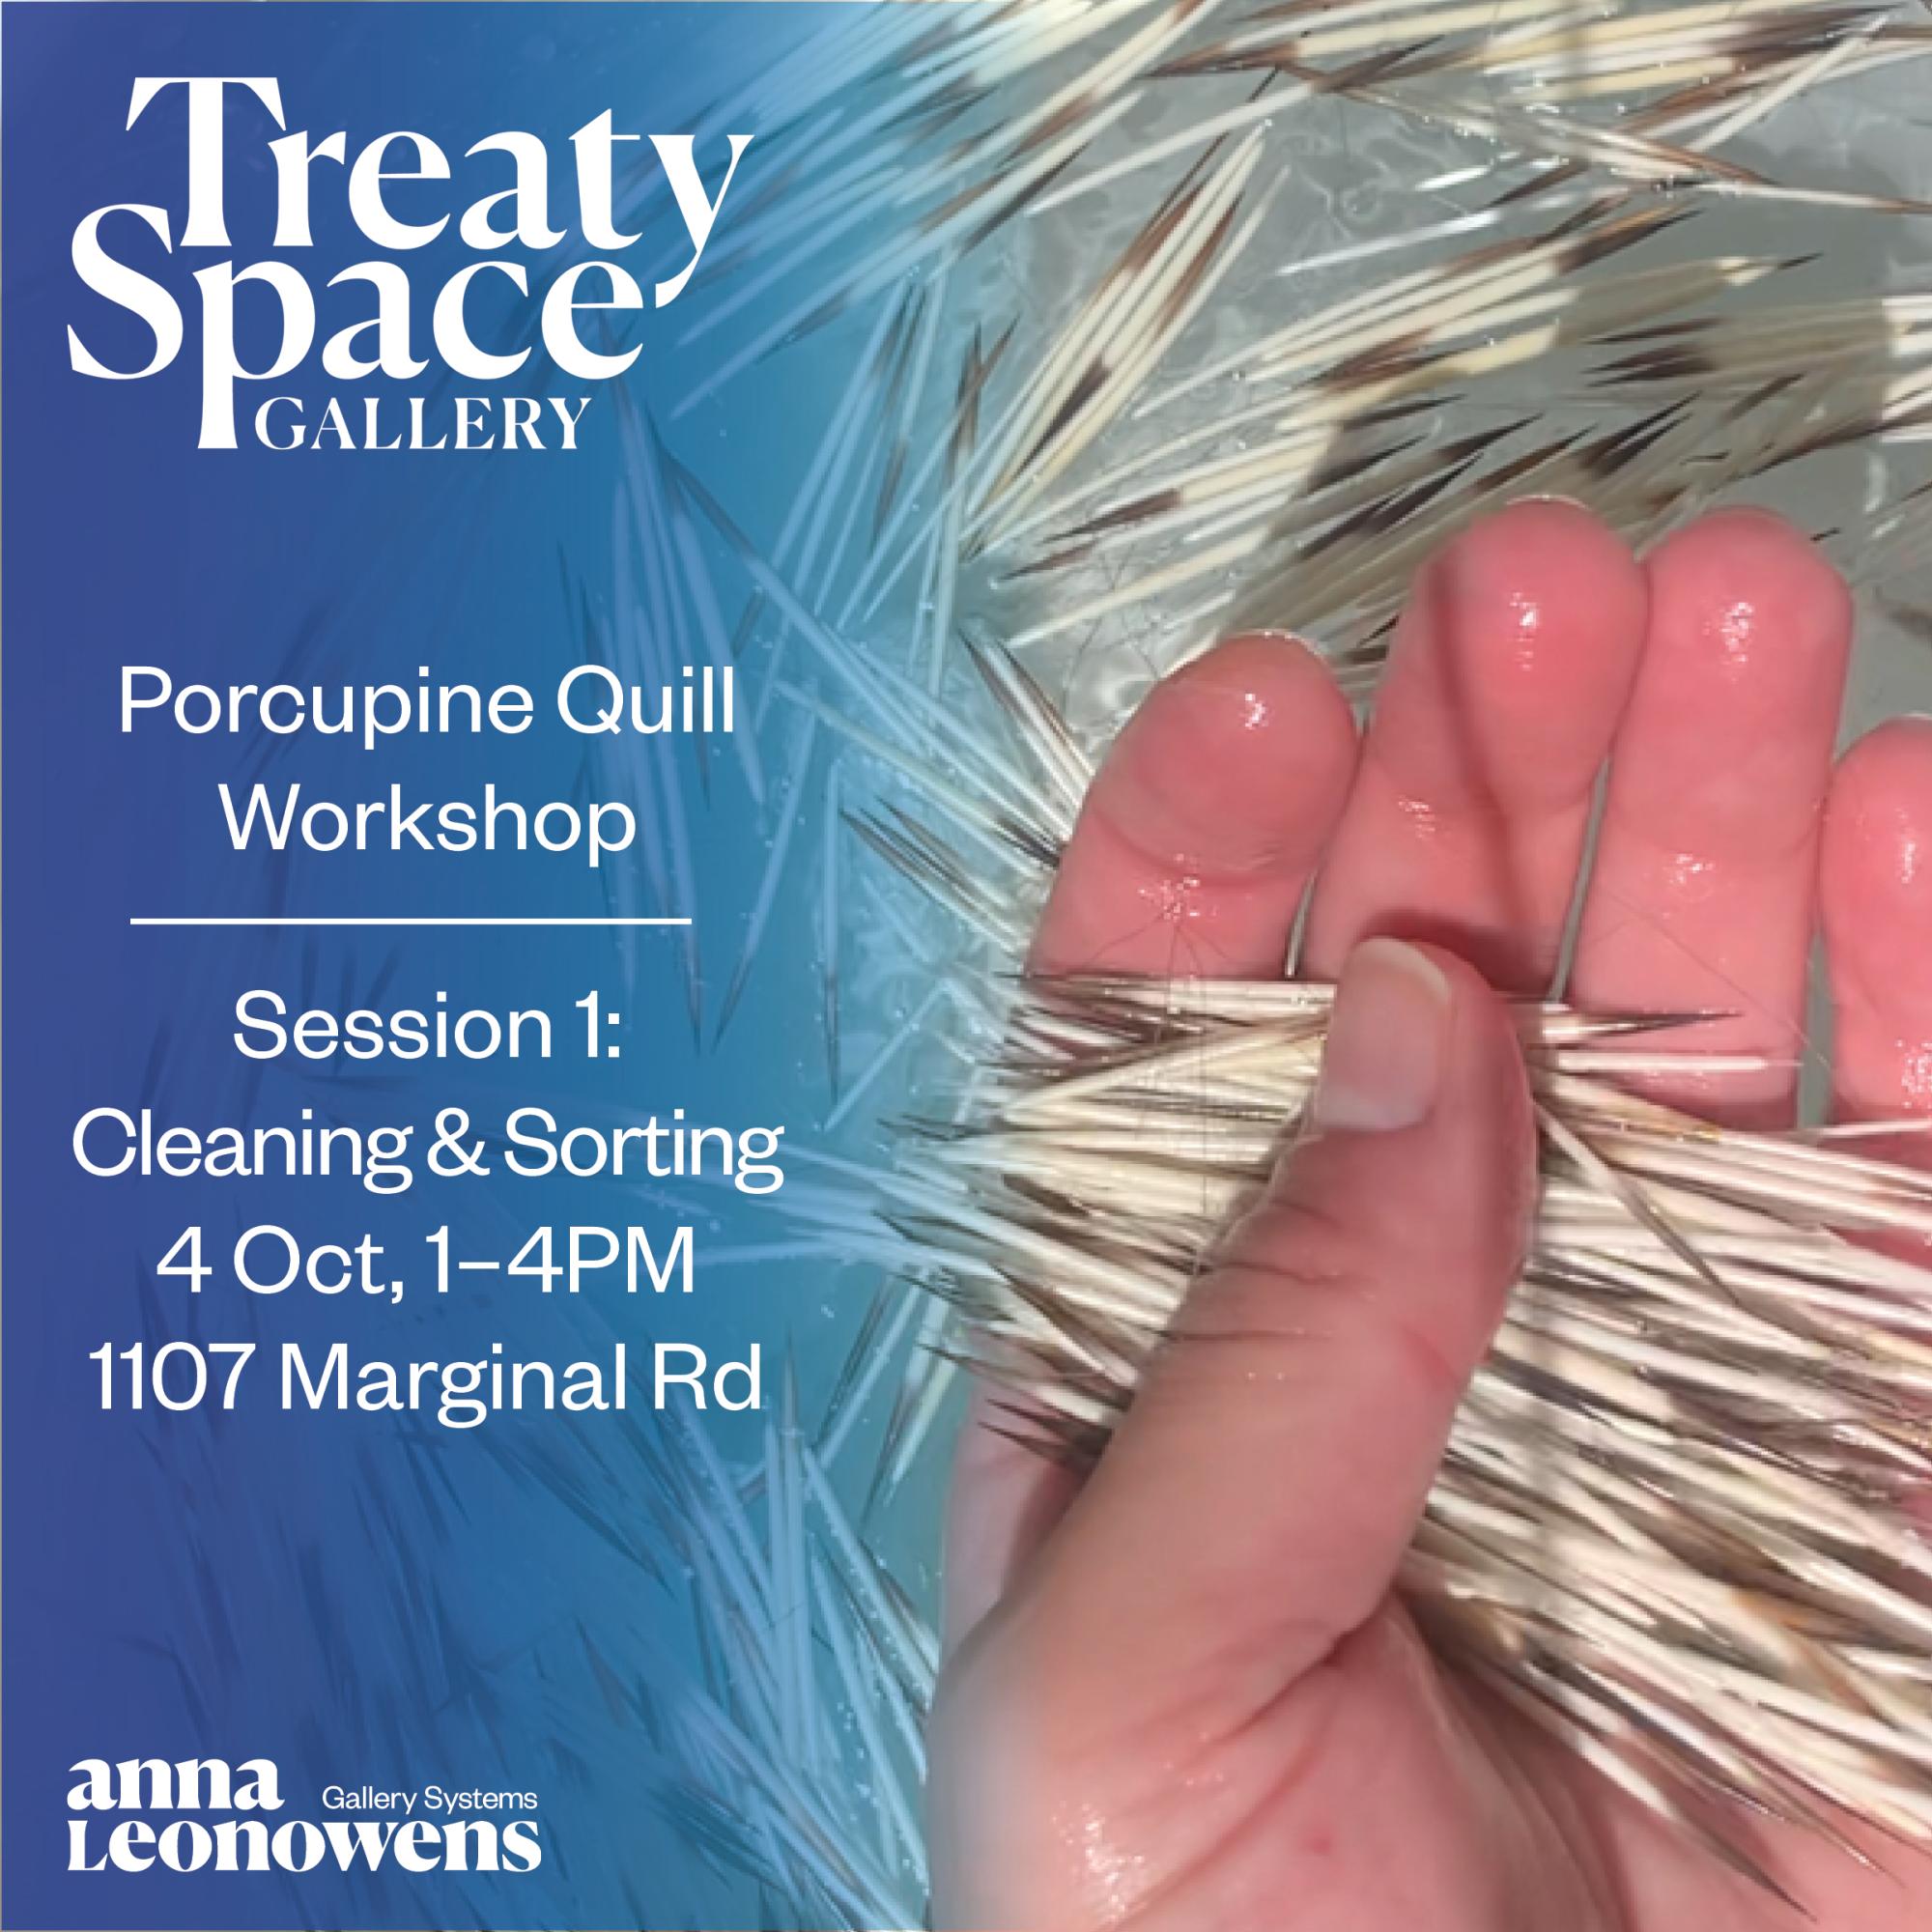 [ID: "Hand holding a bunch of porcupine quills as they are being washed in a bowl of water. The rest of the poster is text that reads Treaty Space Gallery, Porcupine Quill Workshop, Session 1: Cleaning and Sorting, 4 Oct 1-4pm, 1107 Marginal Rd, Anna Leonowens Gallery Systems."]